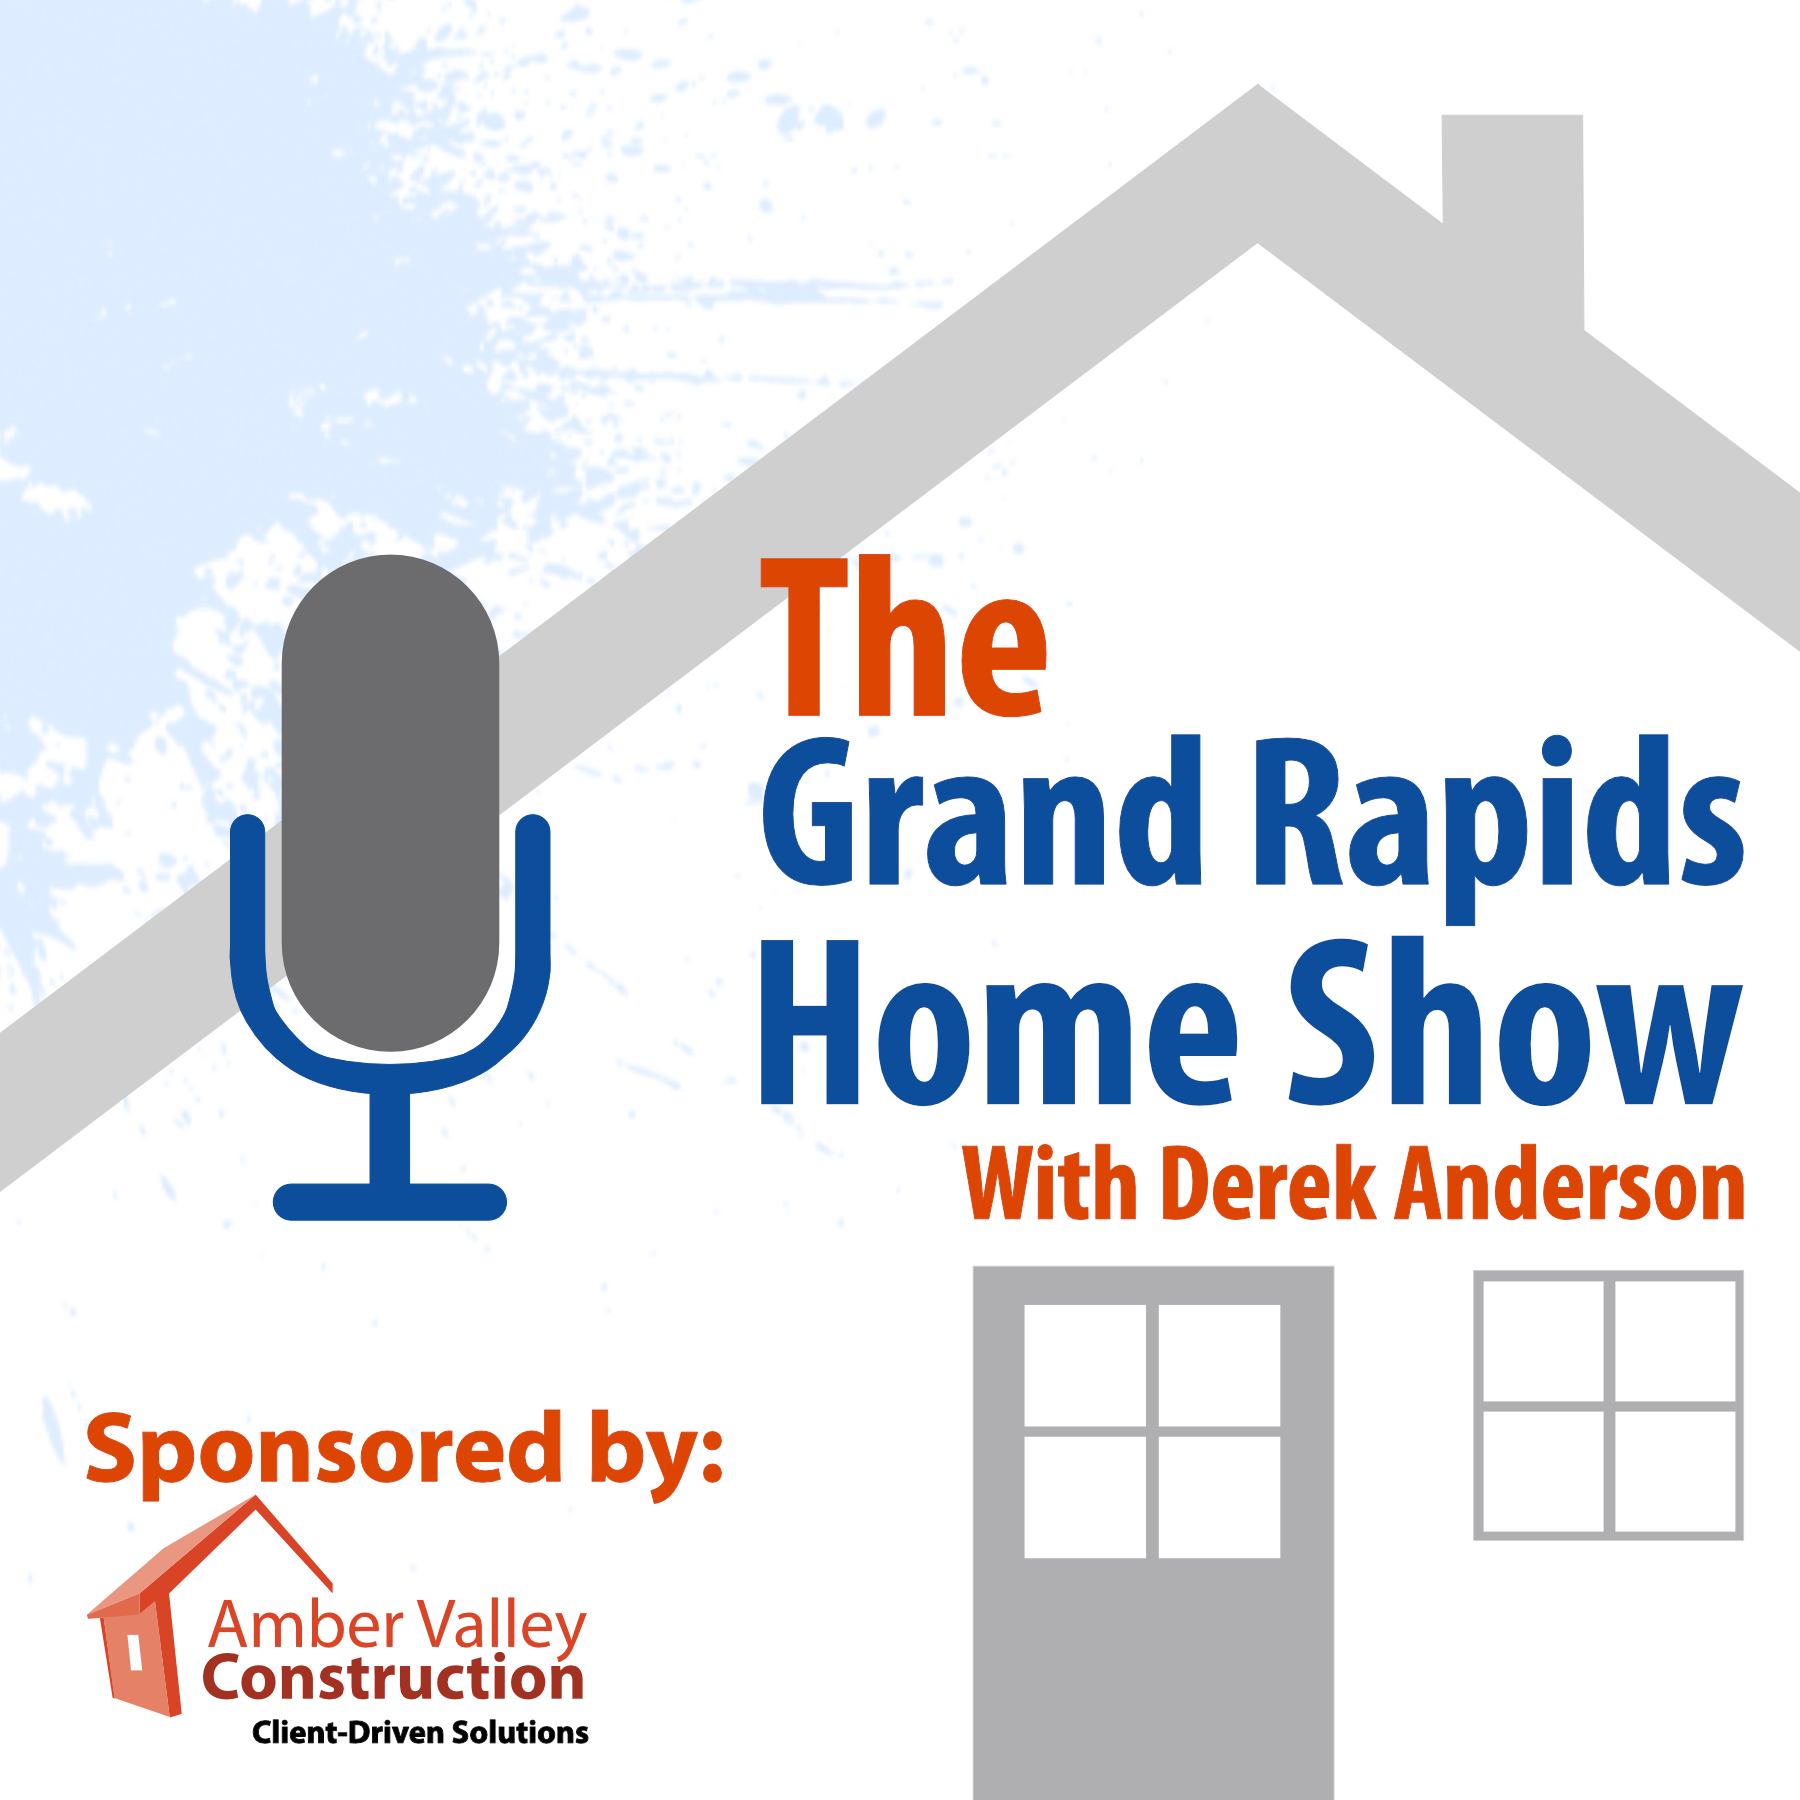 The Grand Rapids Home Show